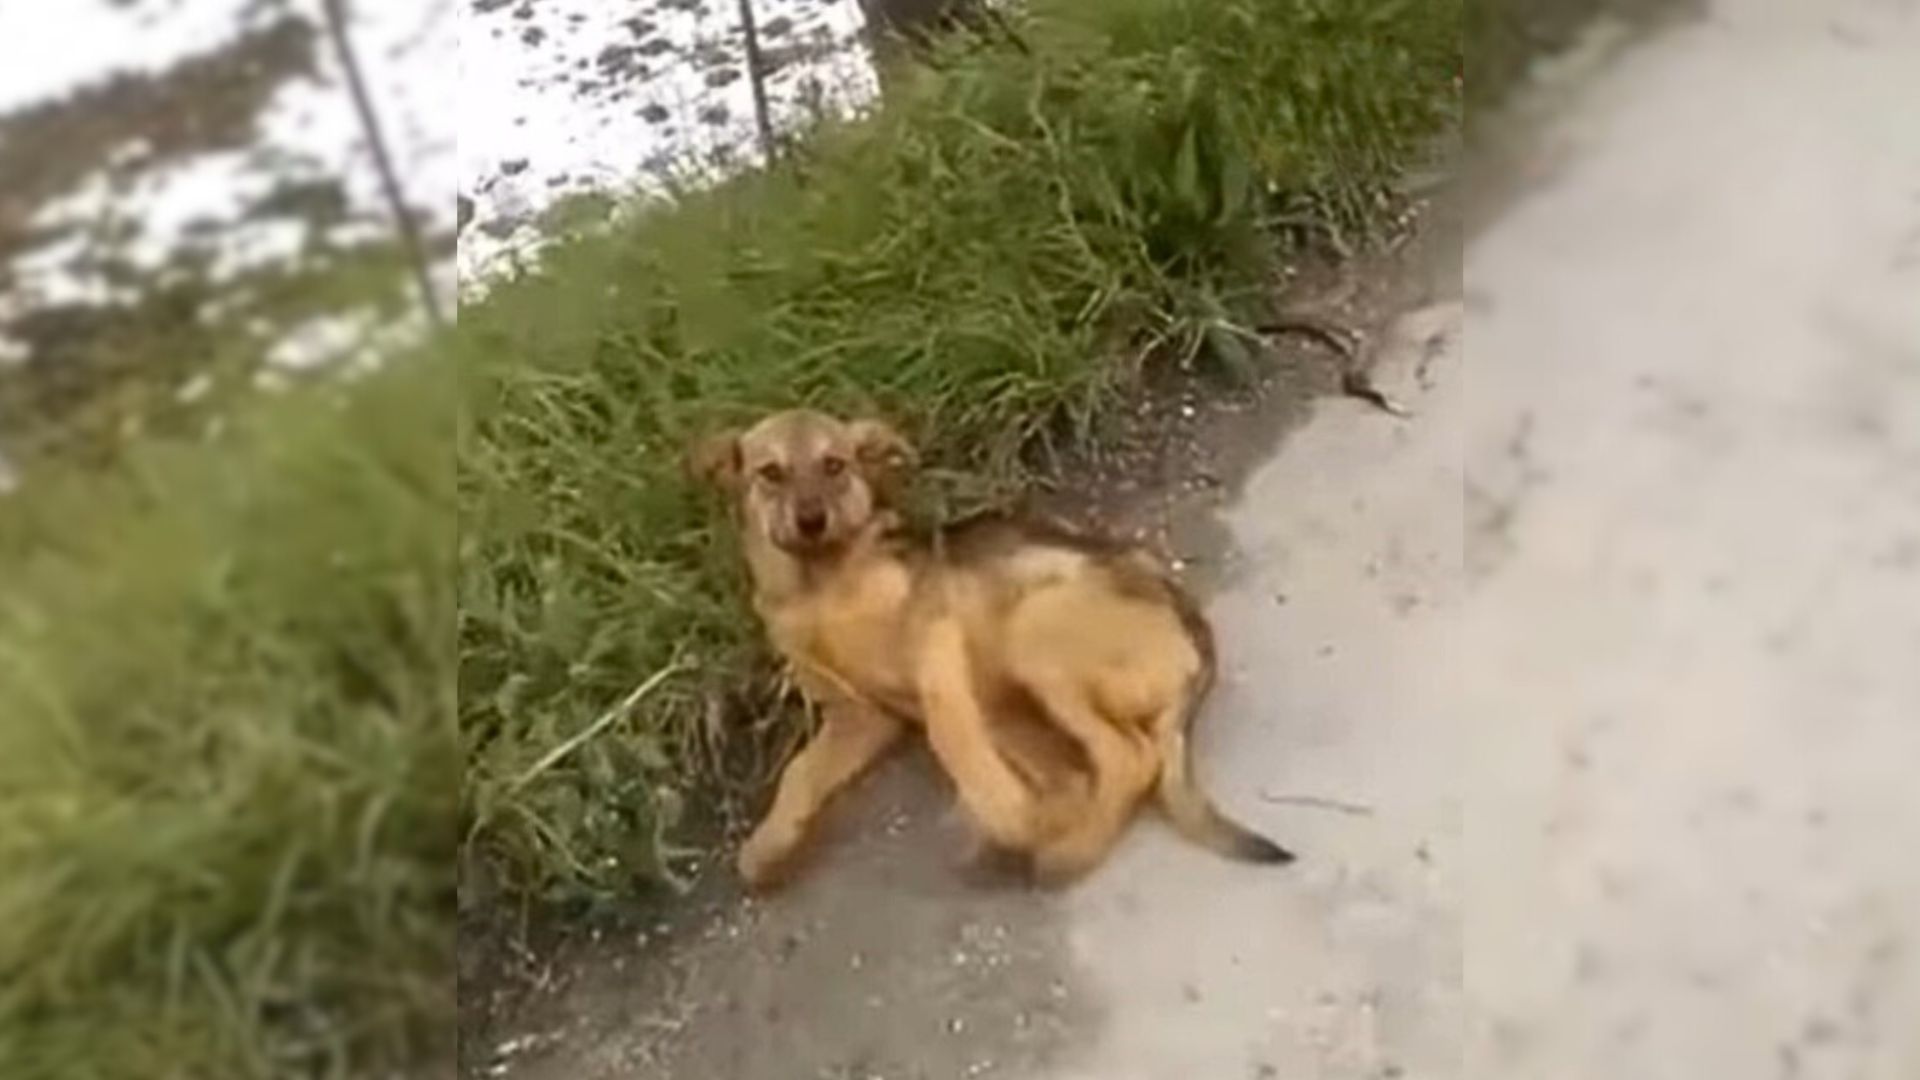 Desperate Injured Pup Can’t Stop Crying Loudly By The Road, Begging For Help